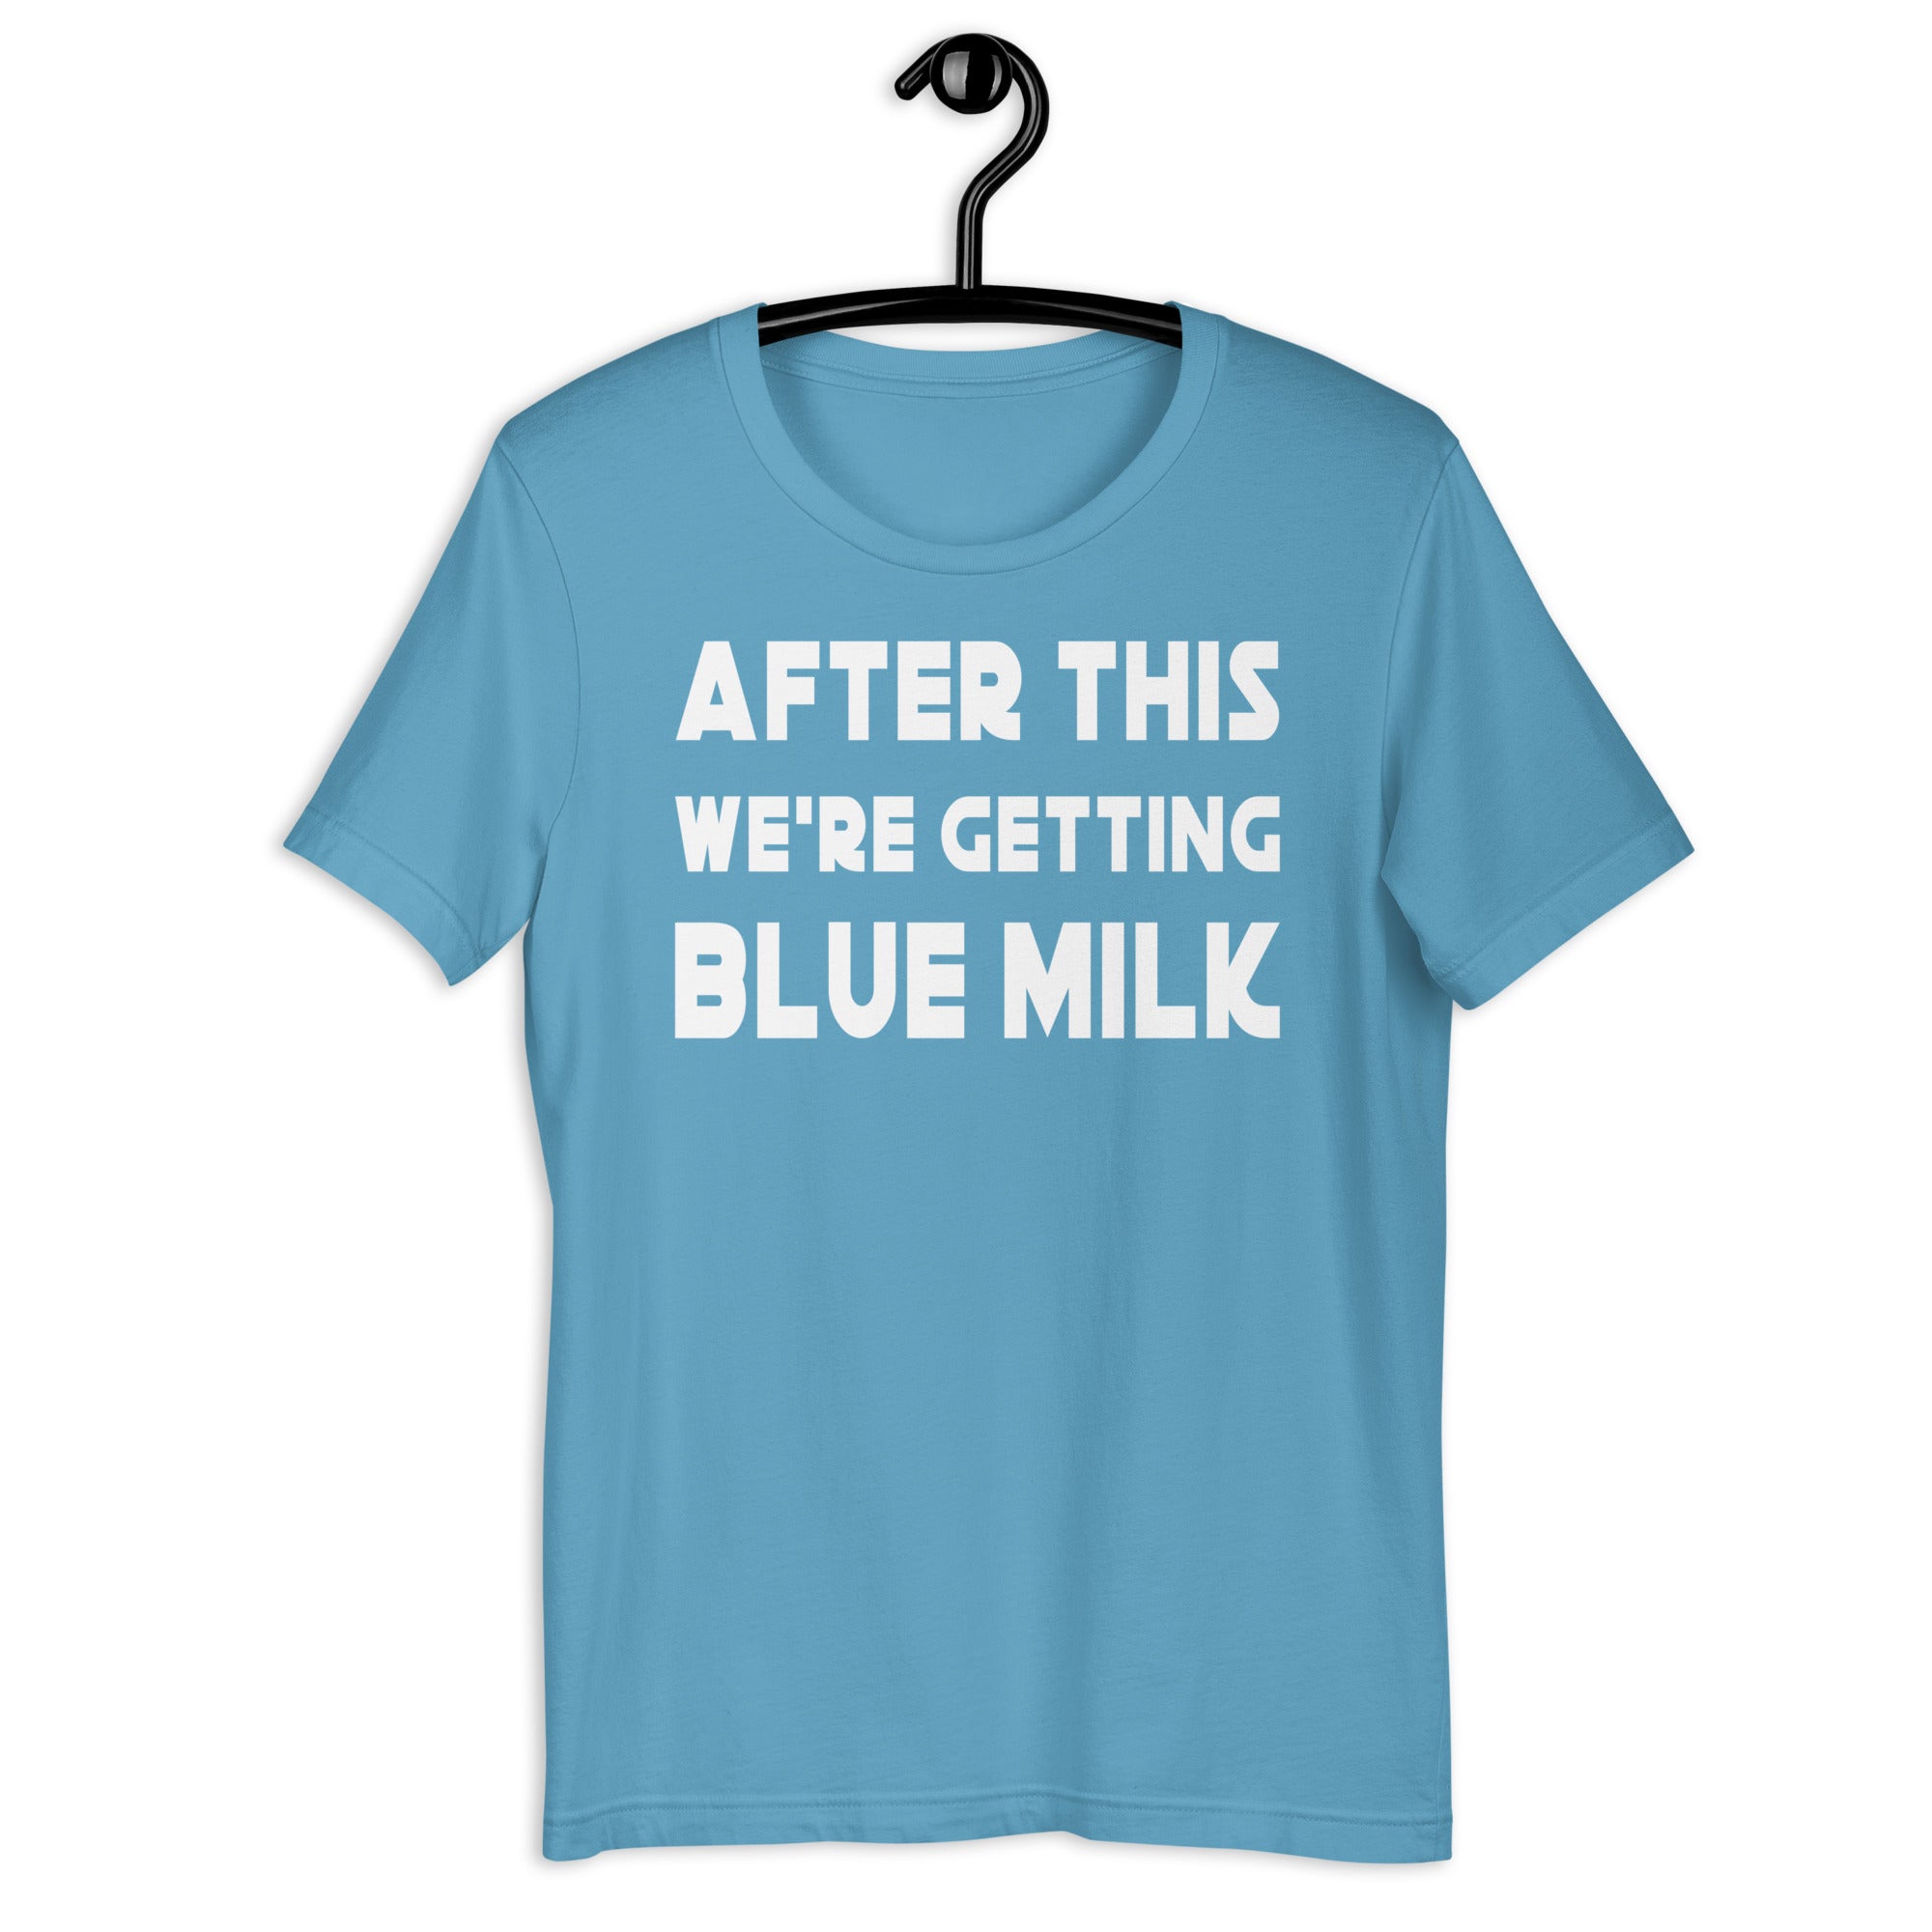 After This We're Getting Blue Milk Shirt